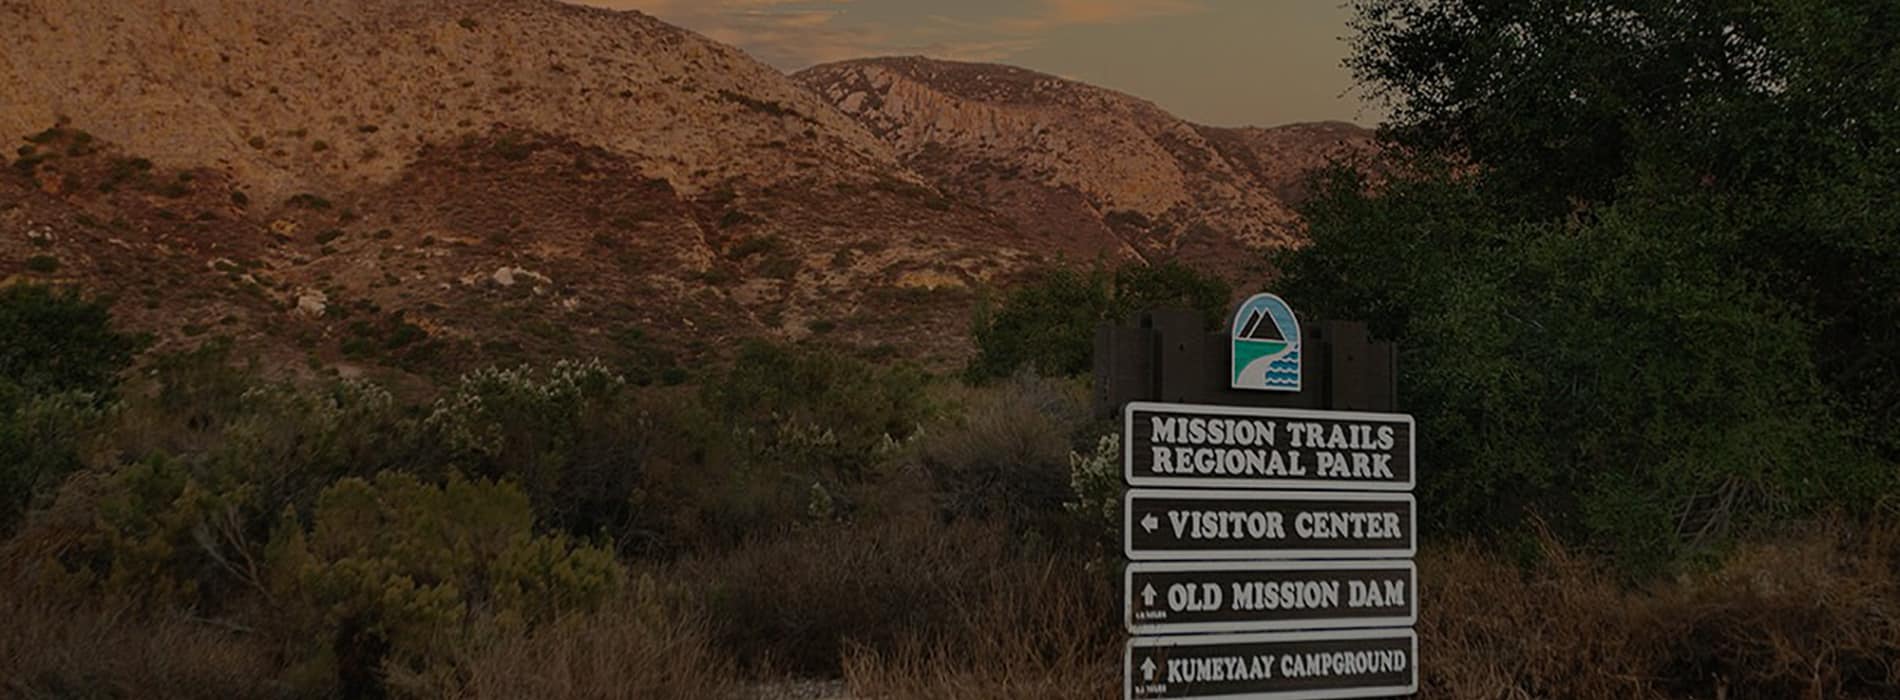 View of Mission Trails Regional Park in San Diego. Discover homes for sale opportunities near Tierrasanta.